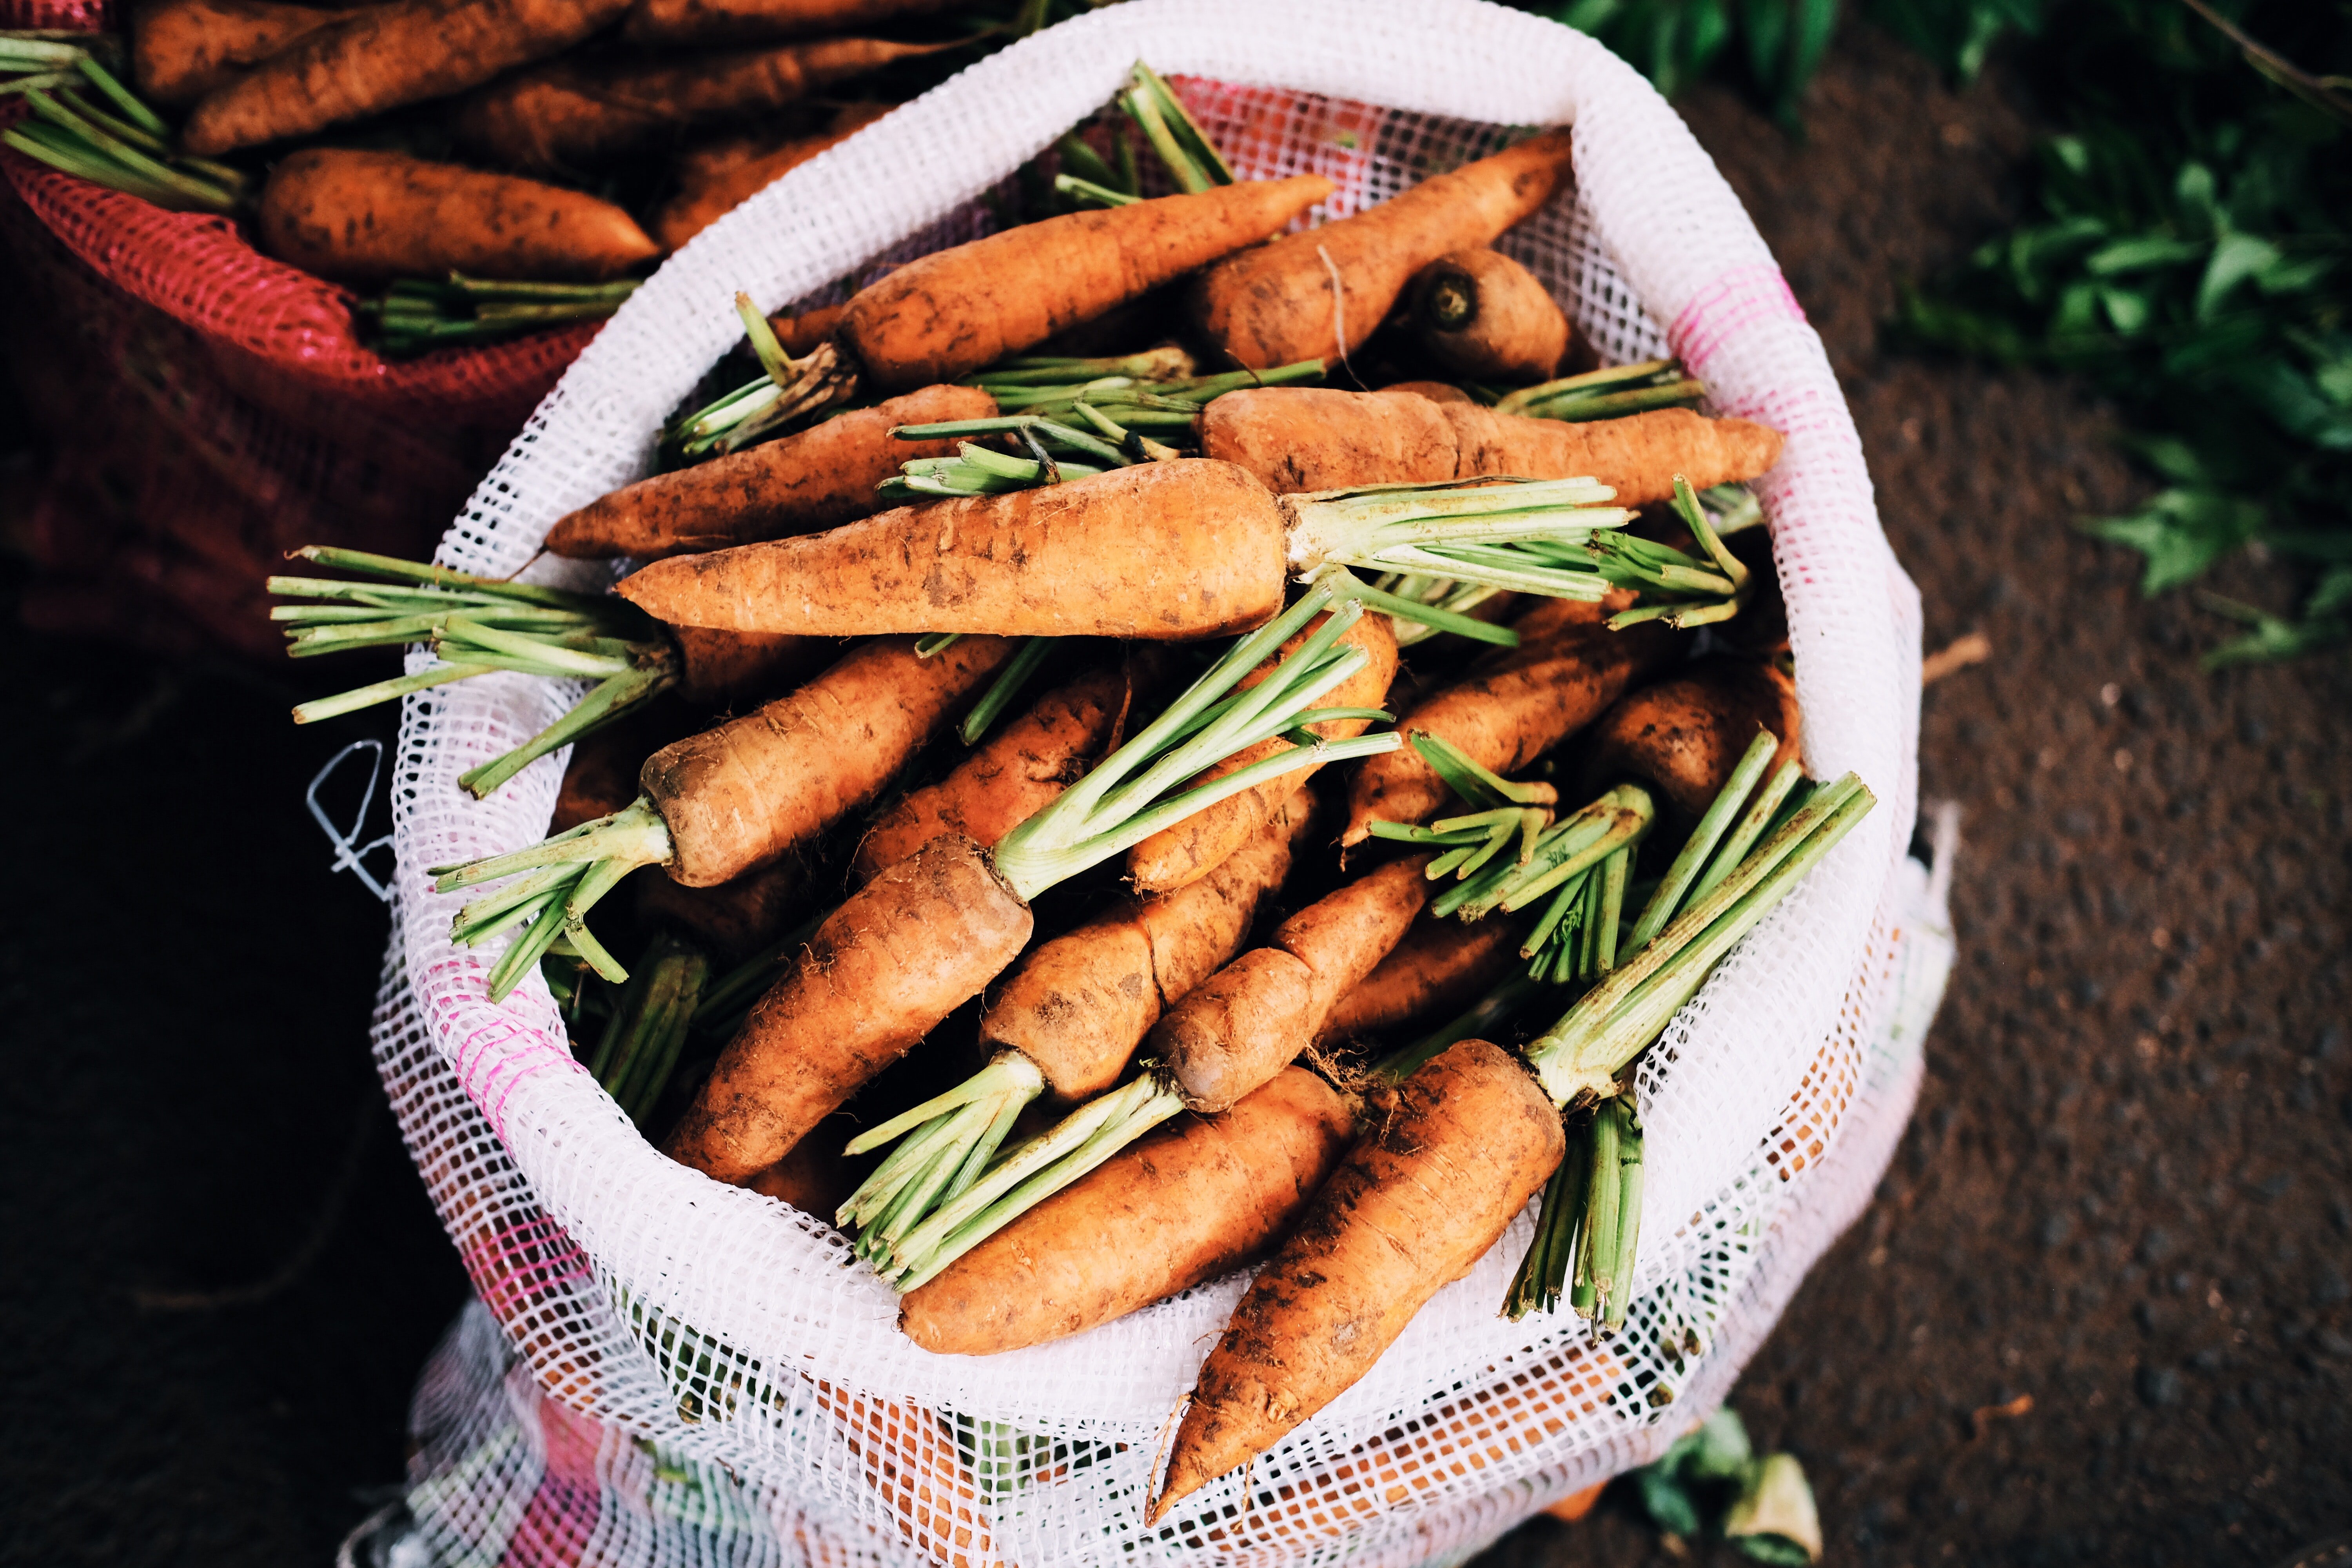 Billy offered bags filled with grains and vegetables to the poor man's family | Photo: Unsplash